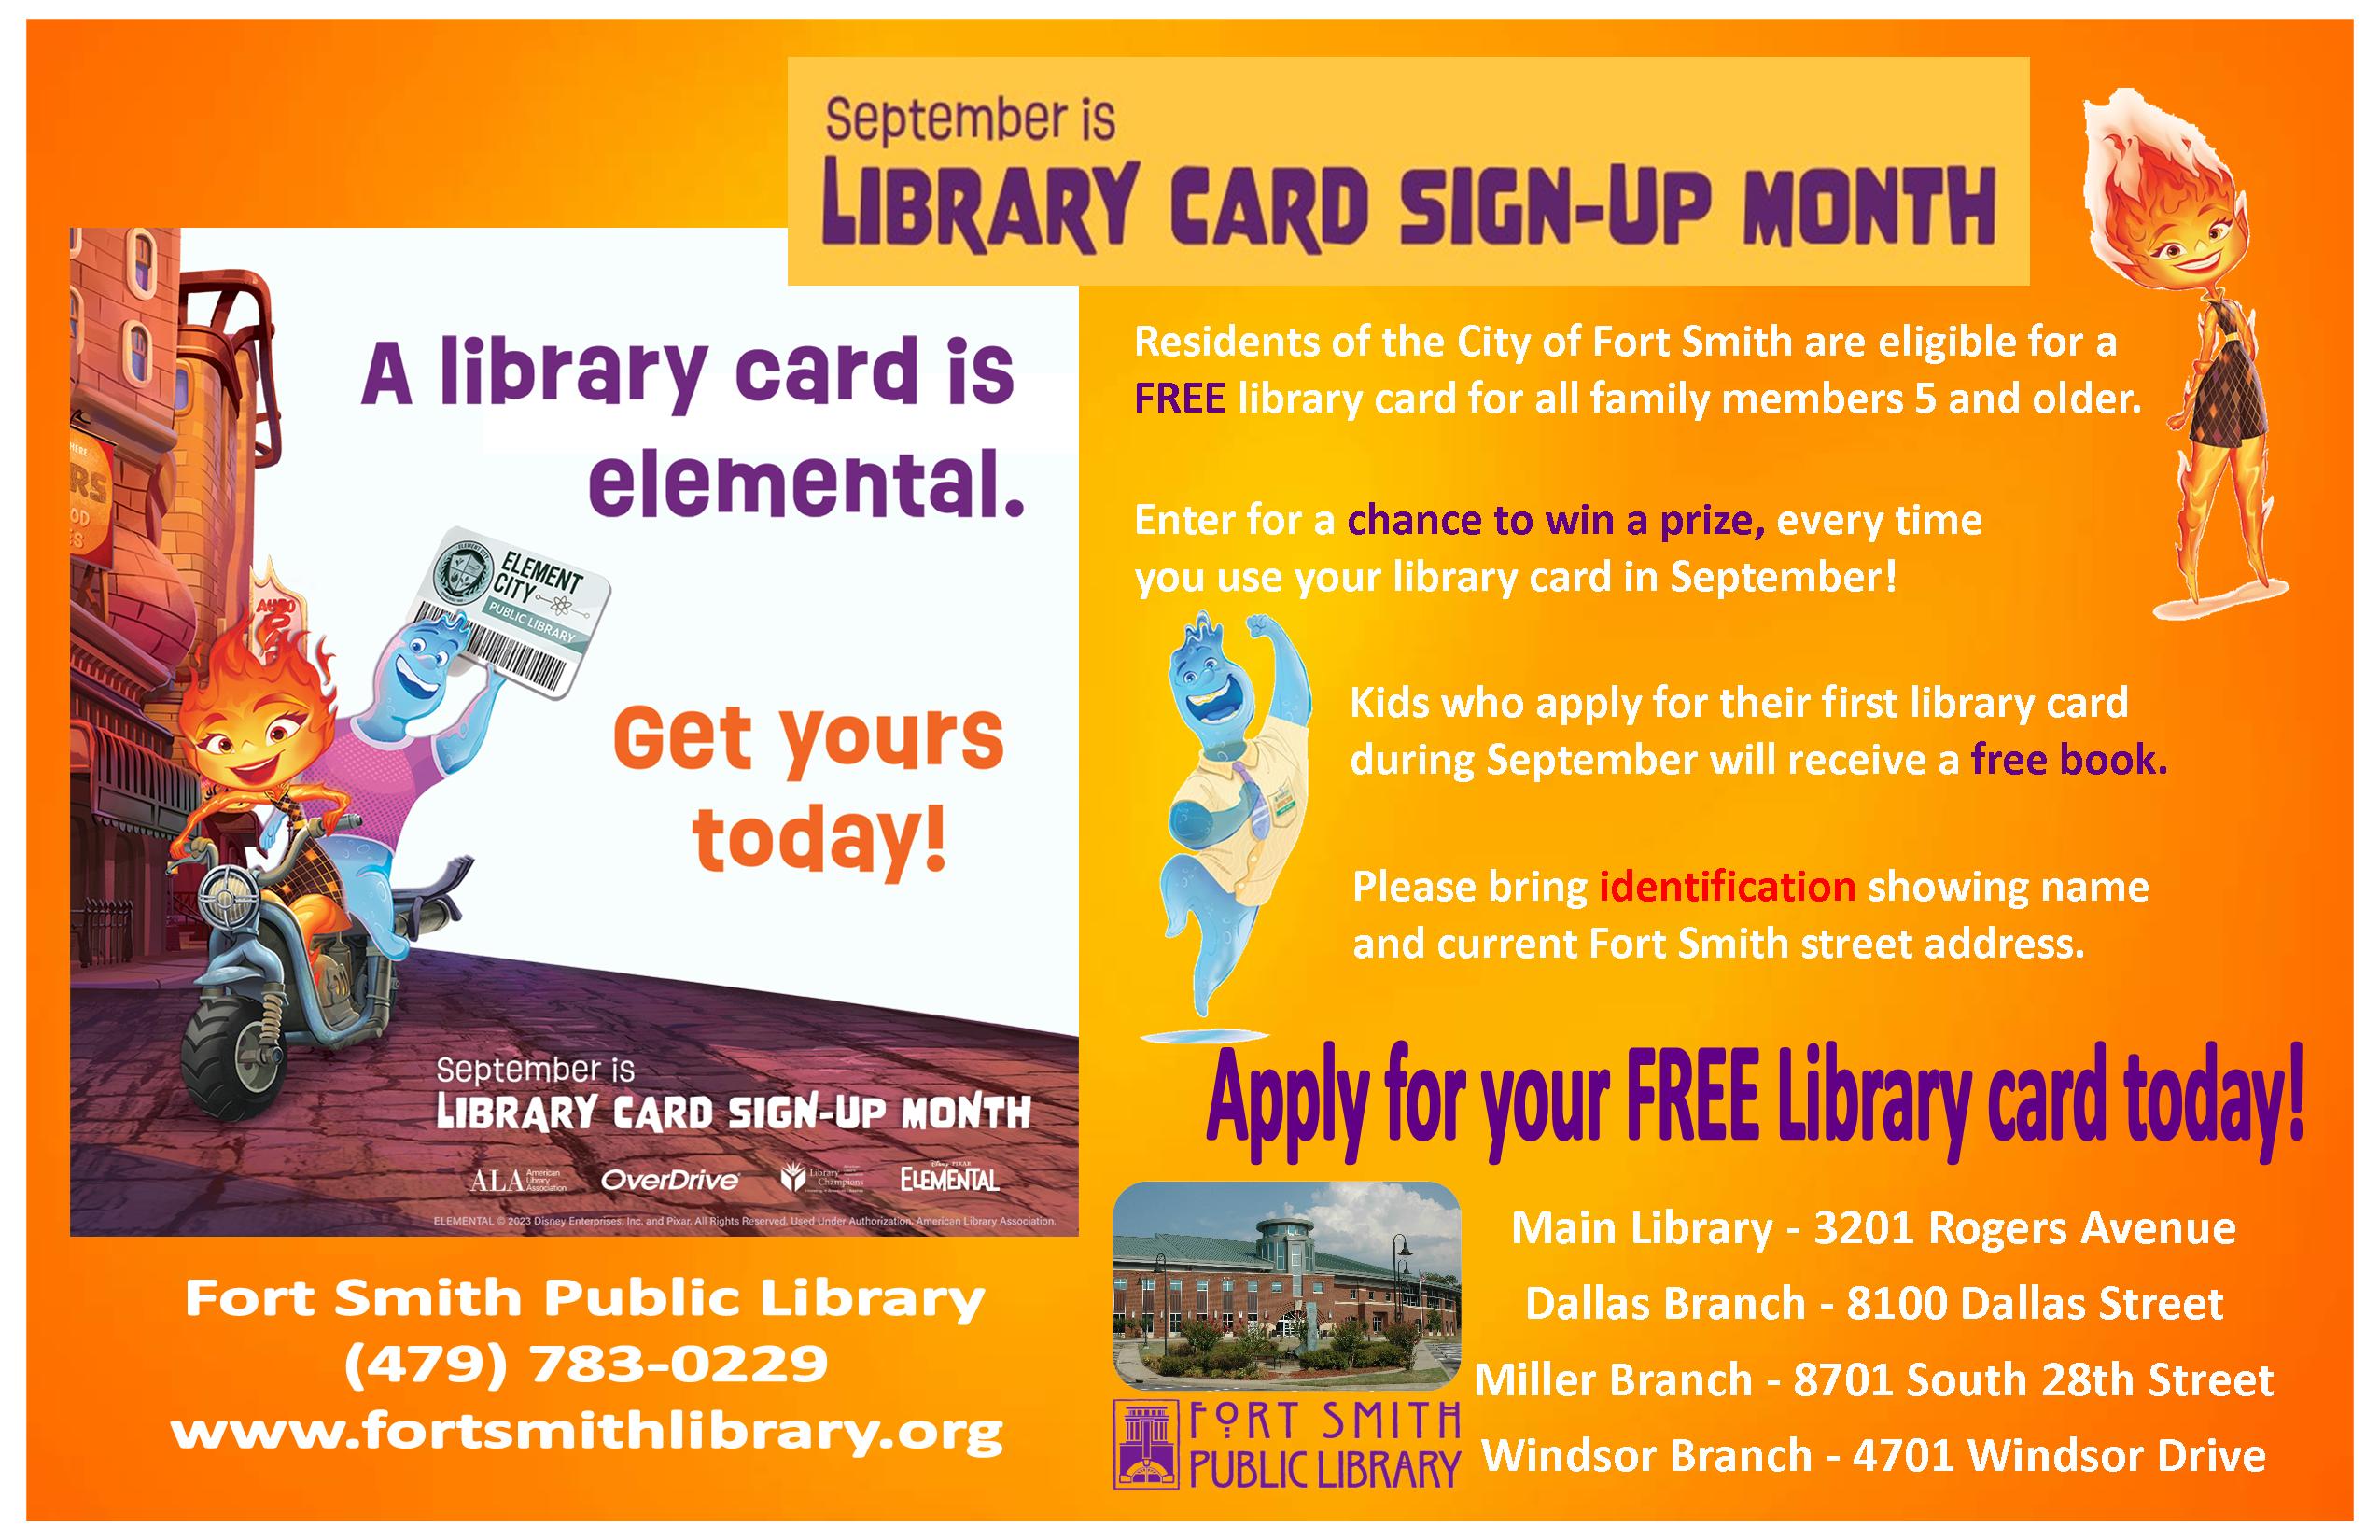 poster promoting library card sign-up month